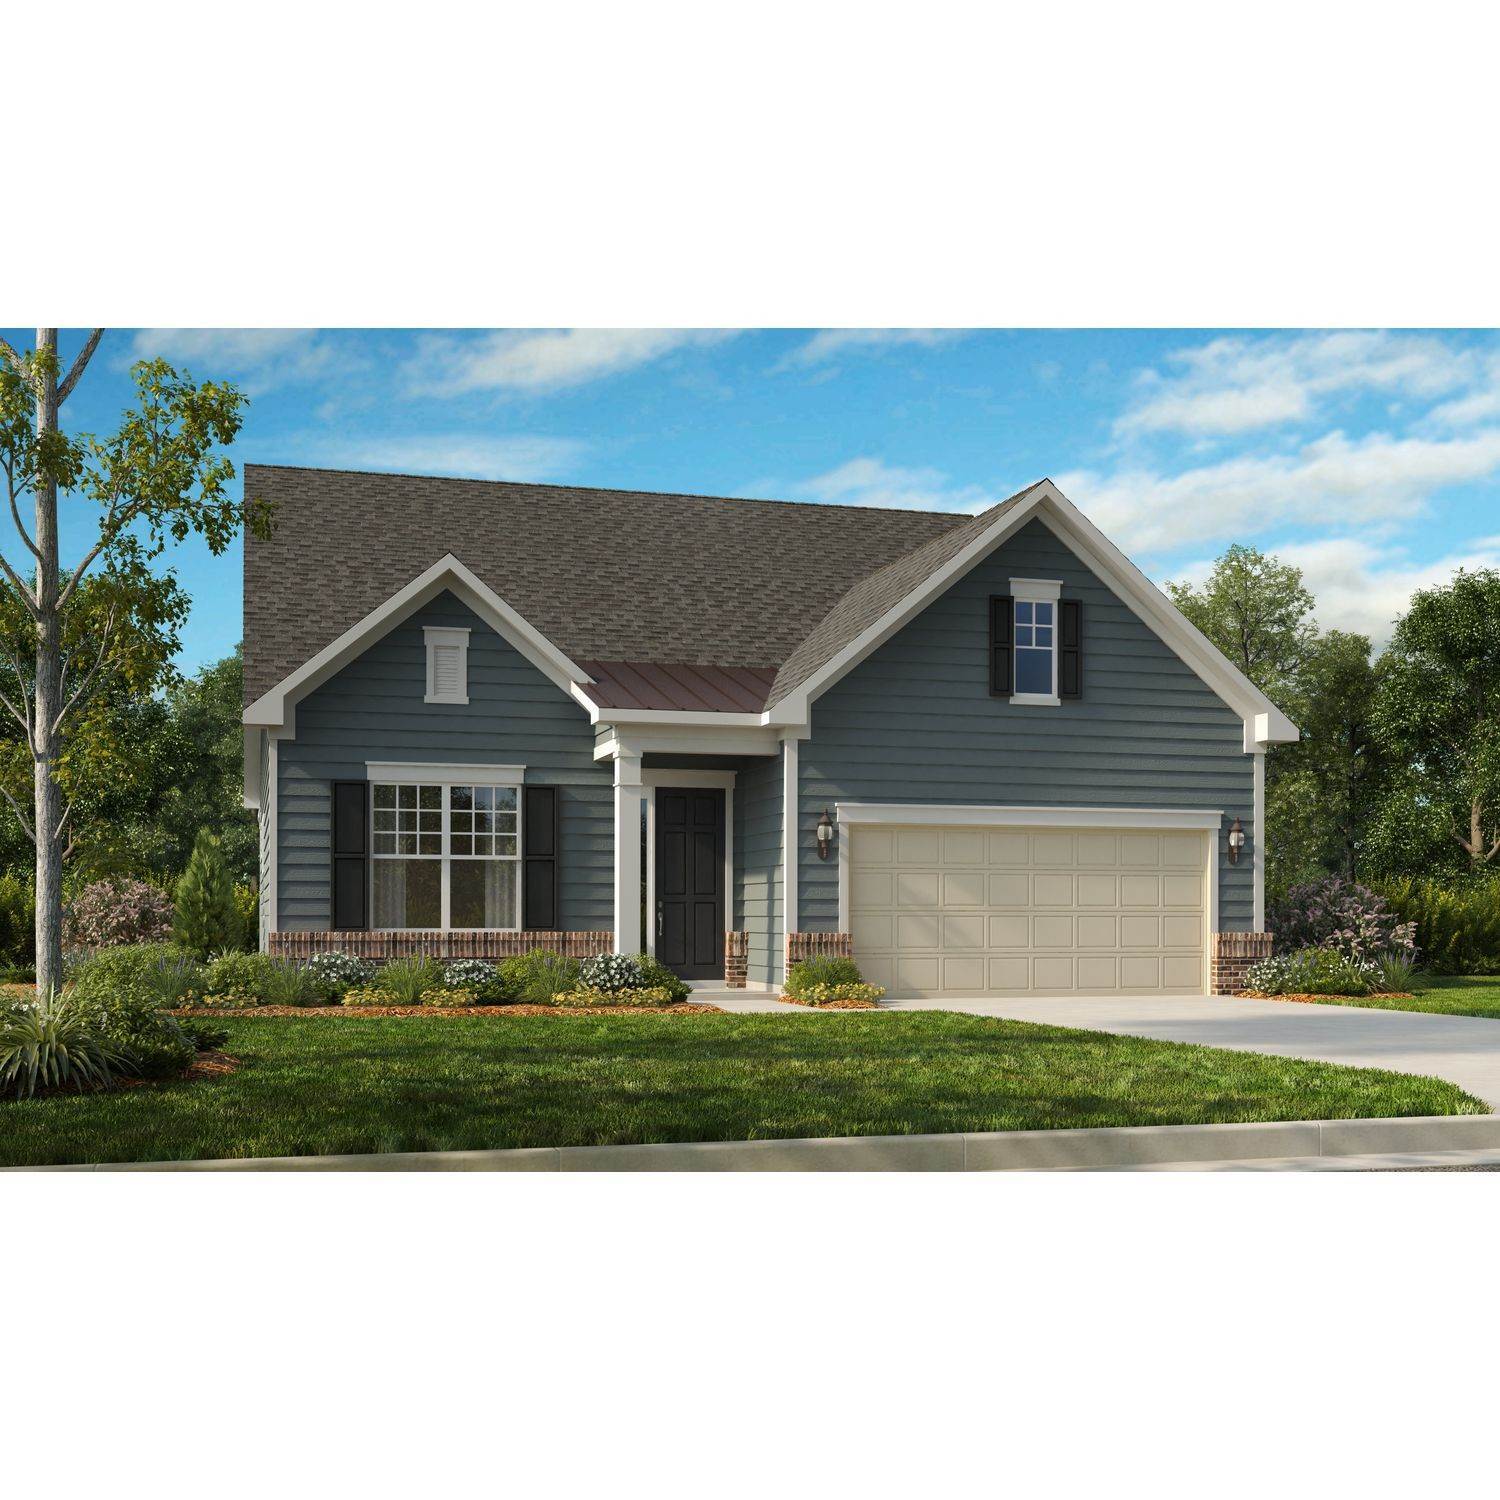 Single Family for Sale at Premier At Reid's Cove 125 Crossvine Drive, Mooresville, NC 28117